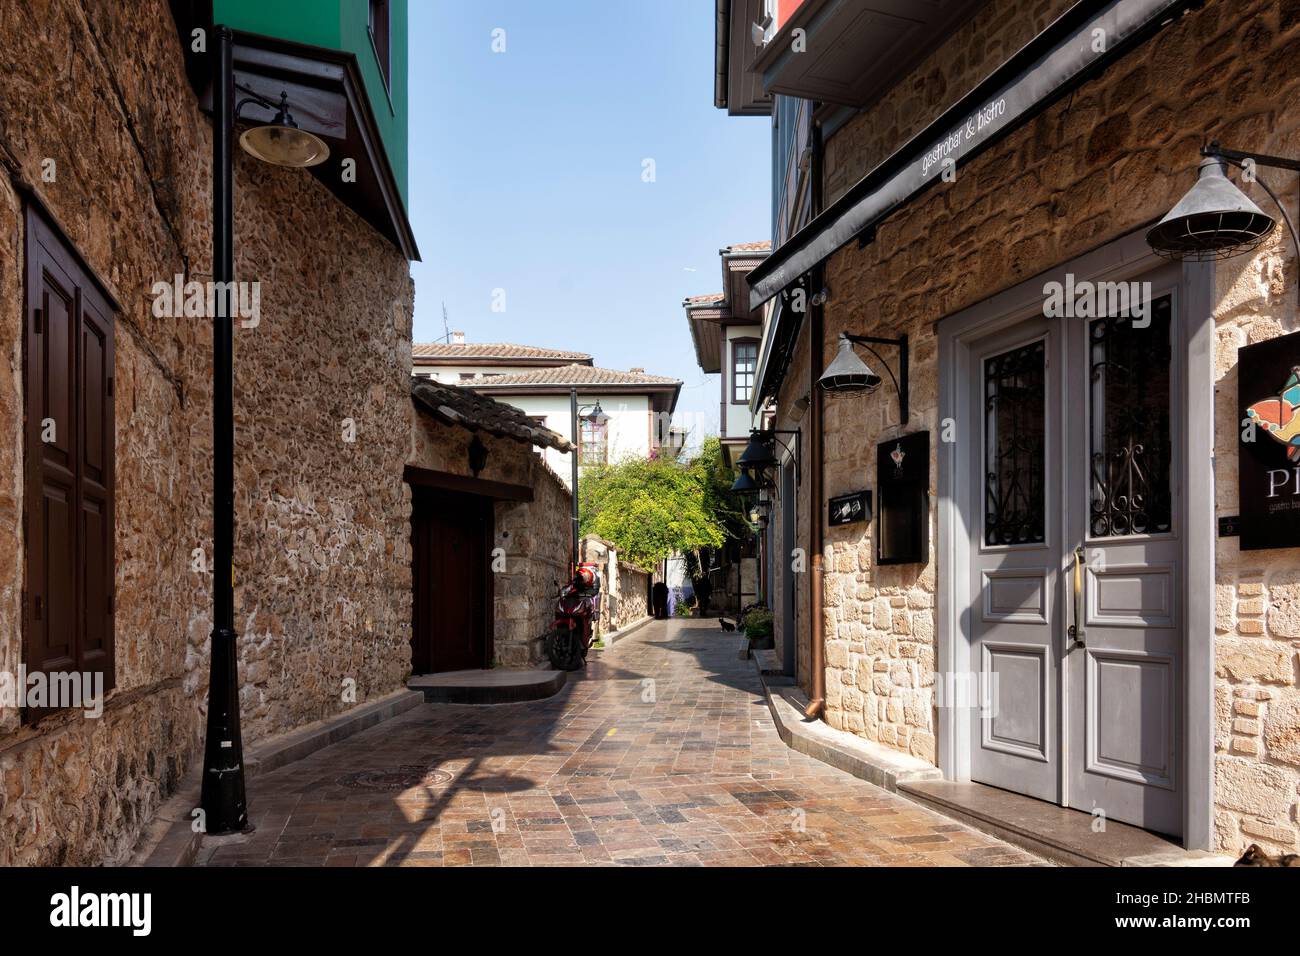 Antalya, Turkey - March 14 2020: Street in the old town. Stock Photo